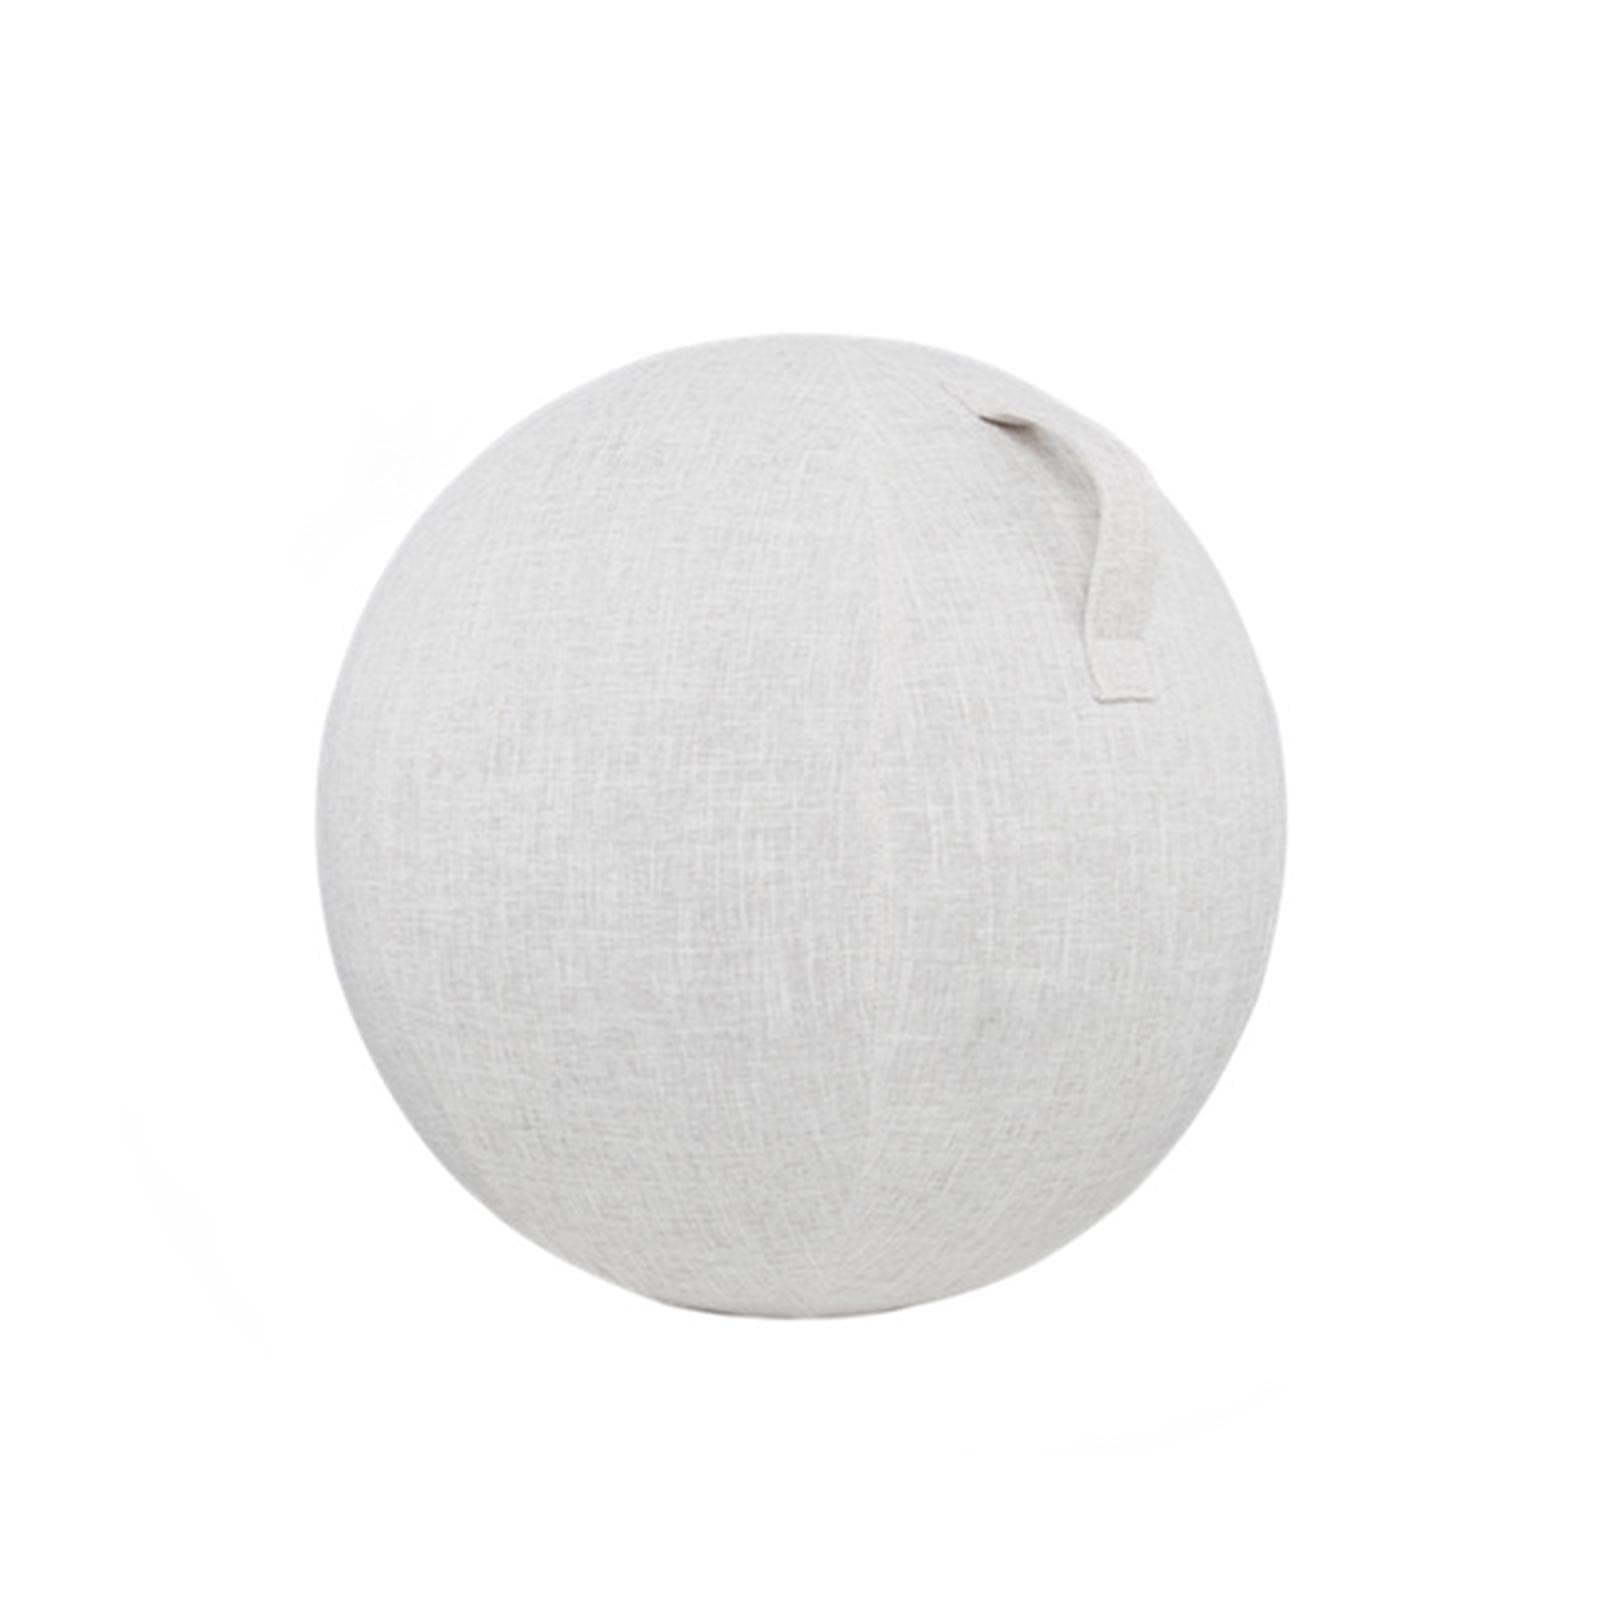 QOTSTEOS Yoga Ball Cover, Foldable Lightweight Yoga Ball Cover Anti Scratch Protective Skin, 55/65/75cm(Beige,size:65cm)